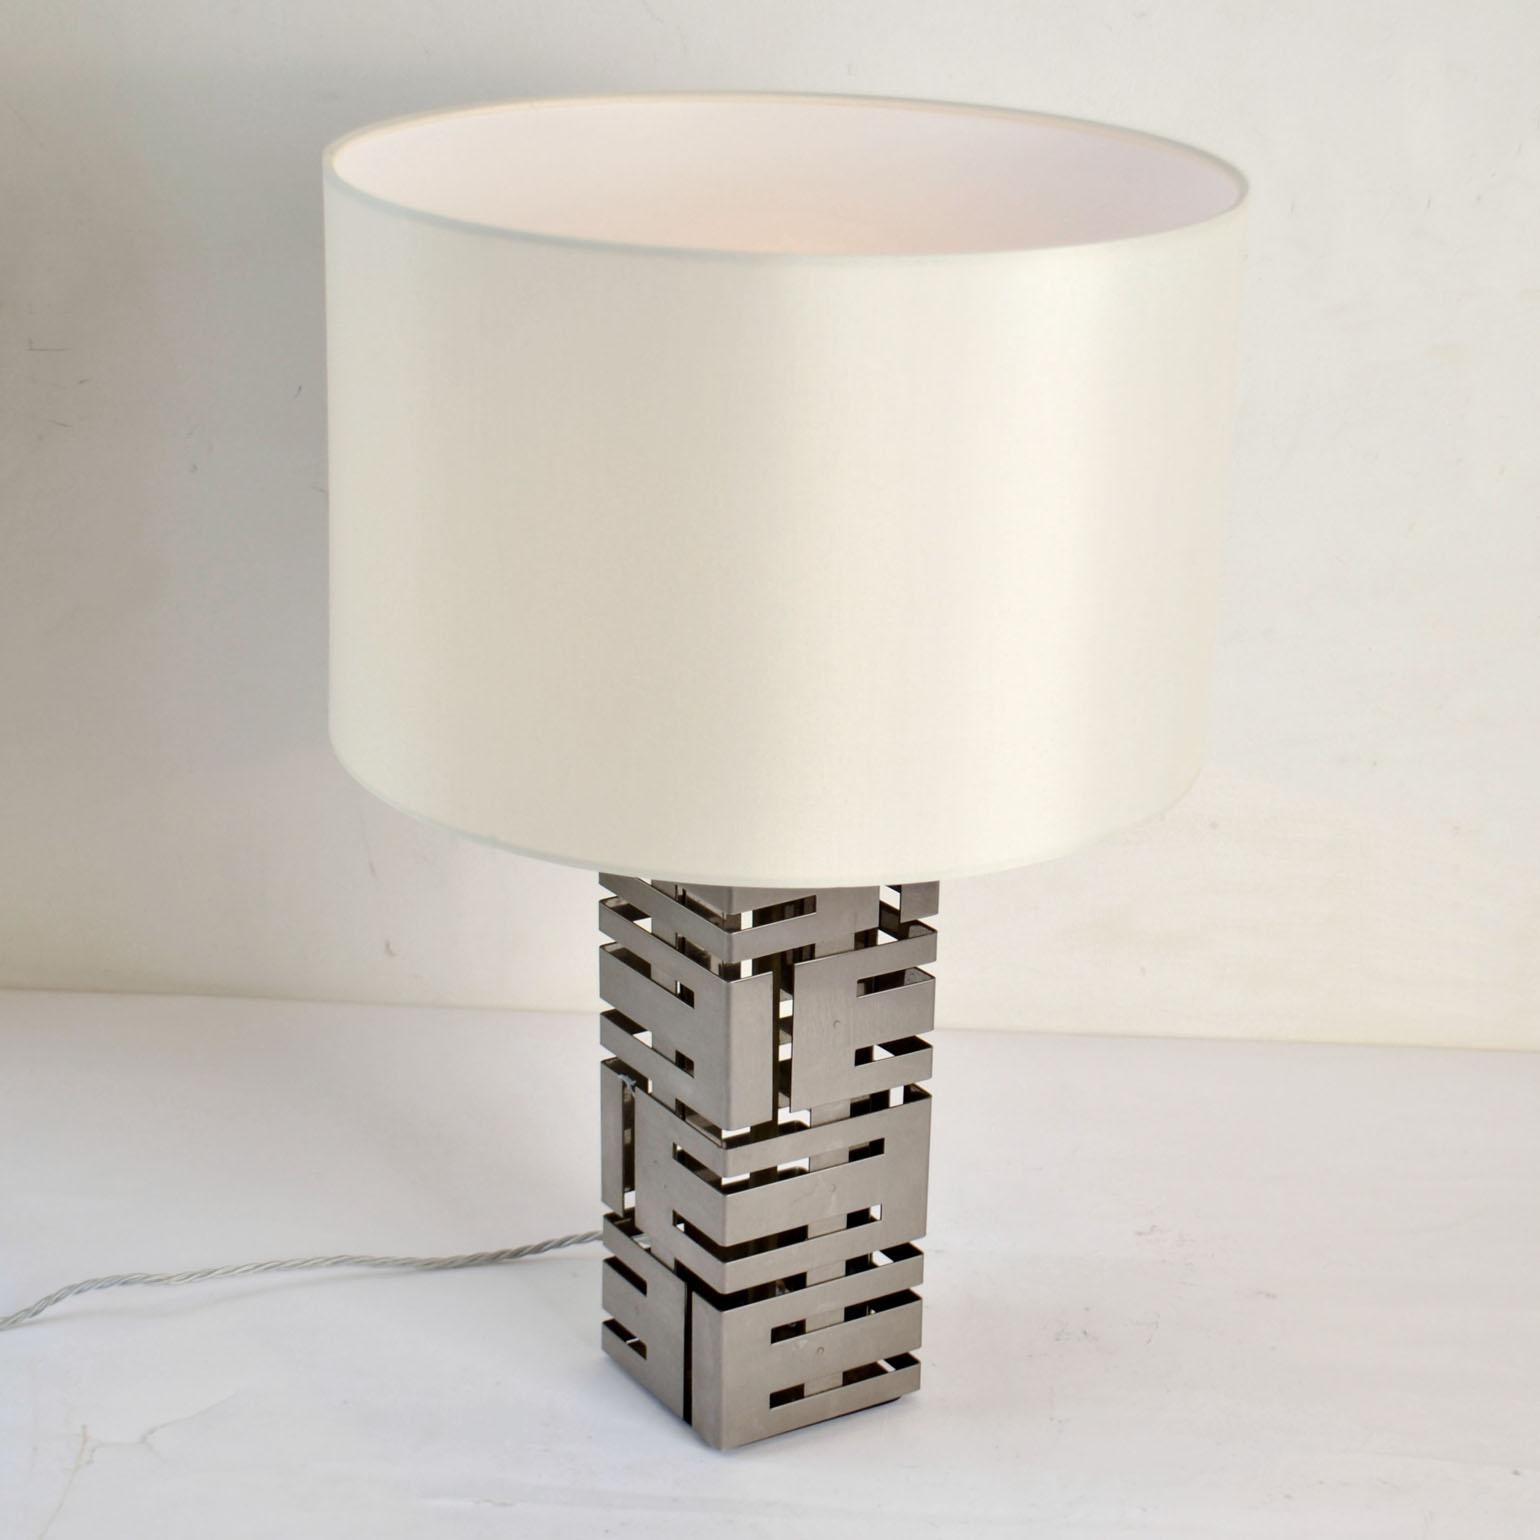 Two Square Stainless Steel Table Lamps by Laurel Company 4